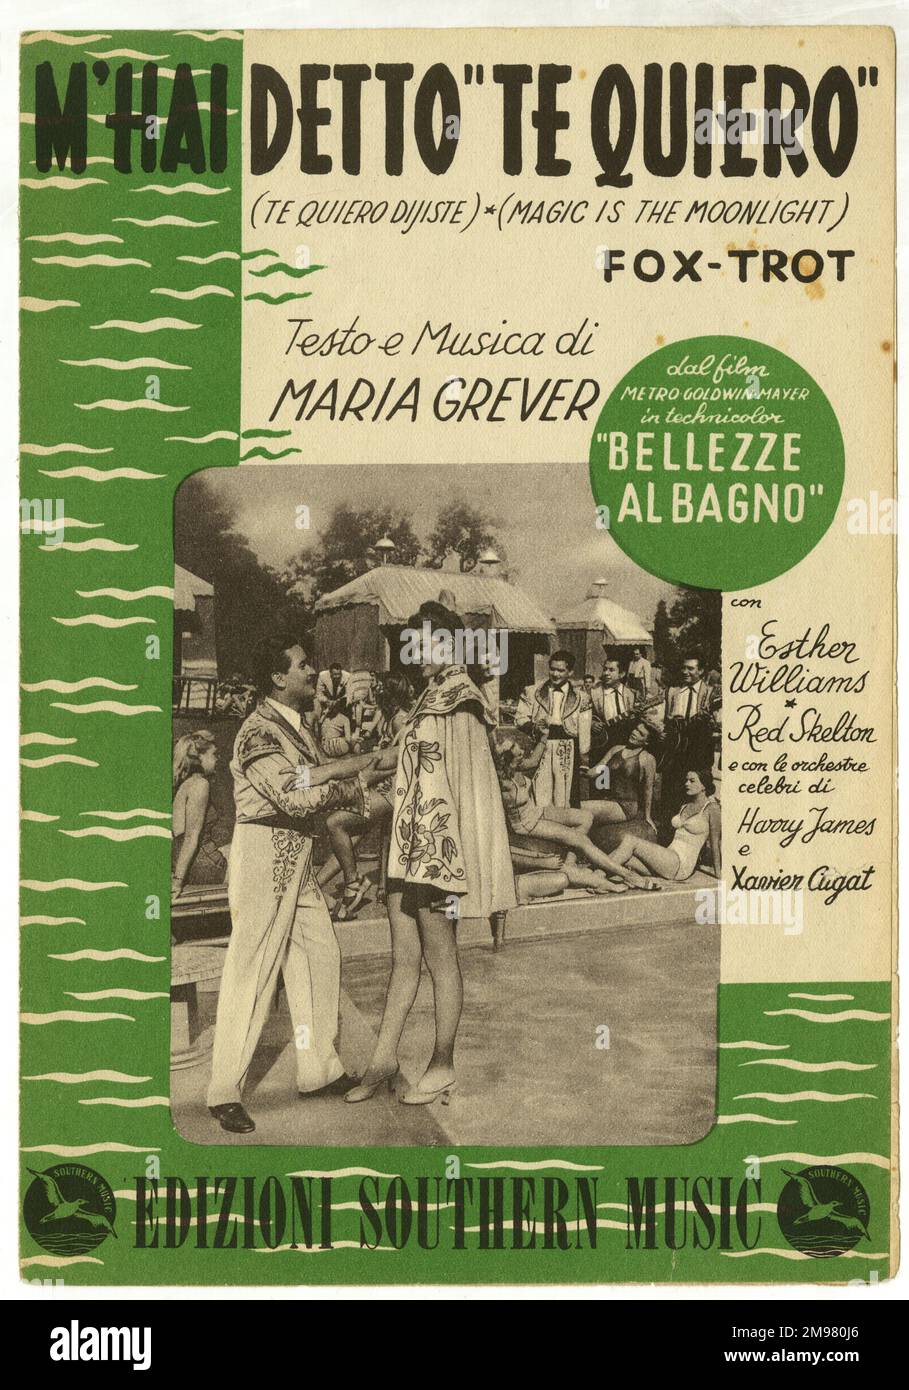 Music cover, Italian version of a song from the MGM film, Bathing Beauty (Bellezze Al Bagno), starring Esther Williams and Red Skelton.  M'Hai Detto 'Te Quiero' (Te Quiero Dijiste, Magic is the Moonlight), Foxtrot, words and music by Maria Grever. Stock Photo